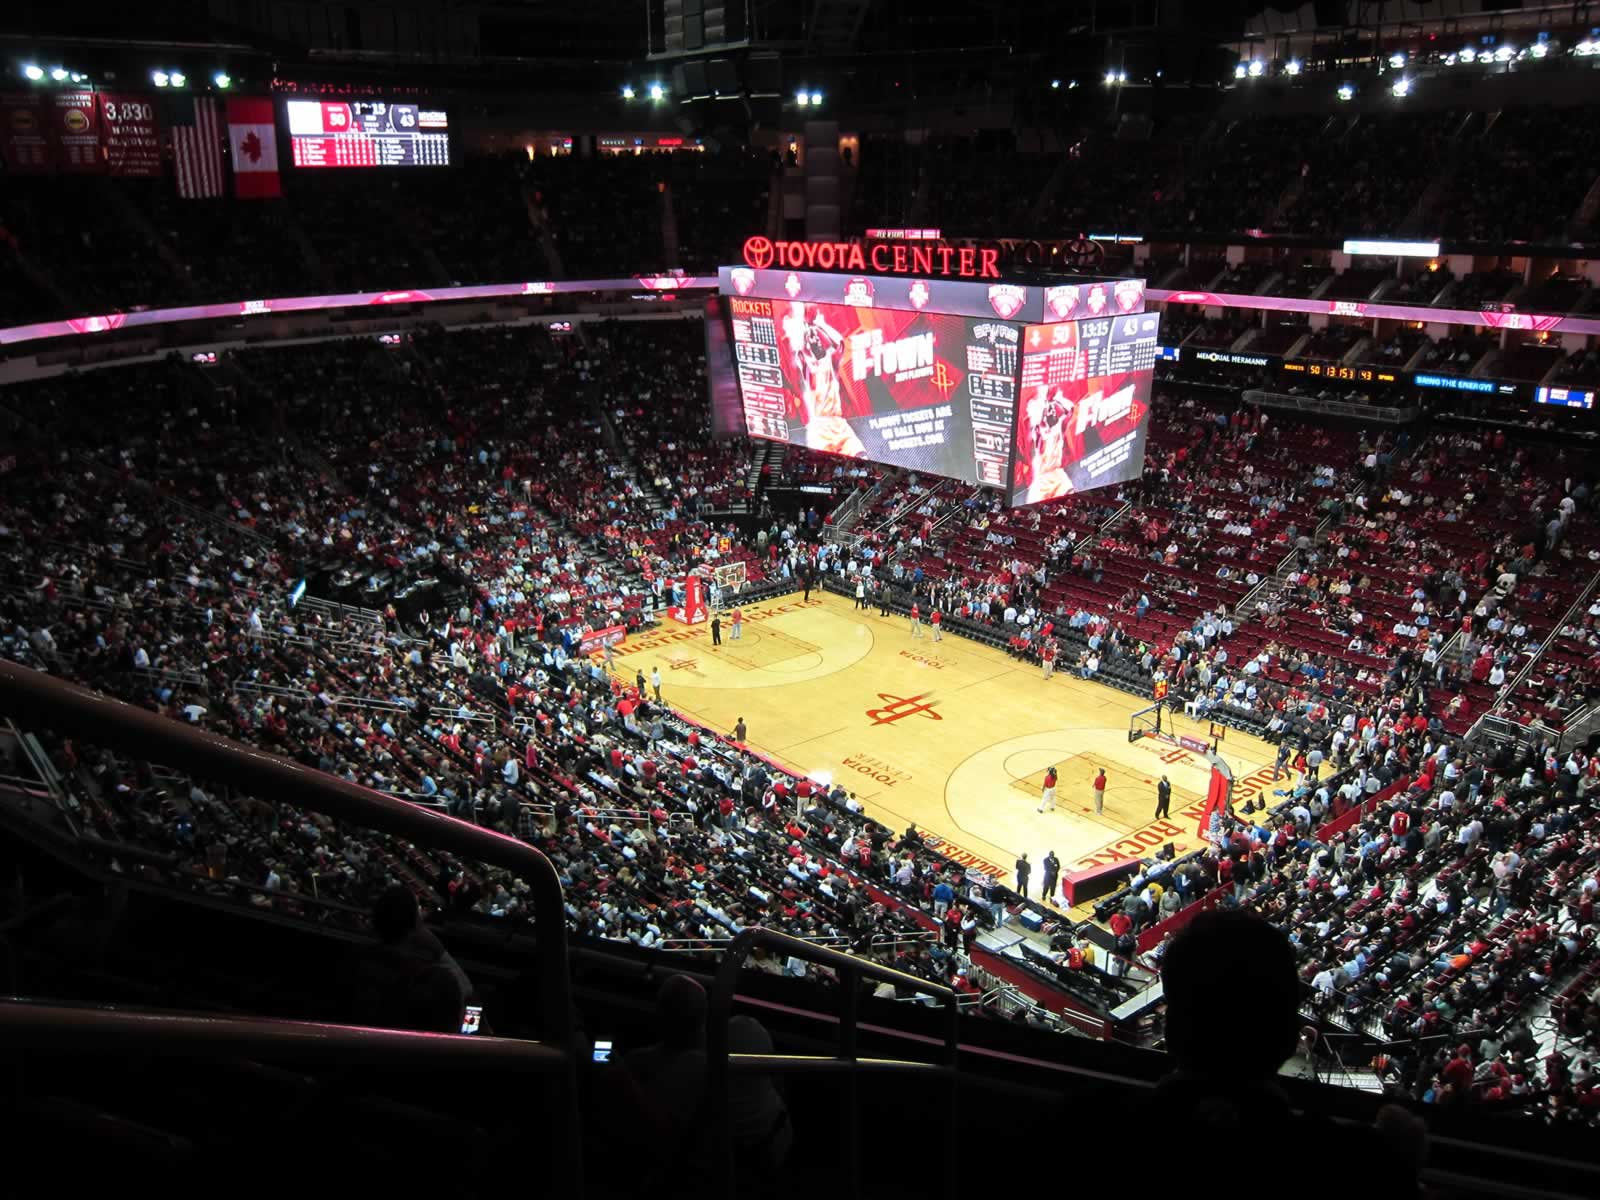 Section 422 at Toyota Center - Houston Rockets - RateYourSeats.com